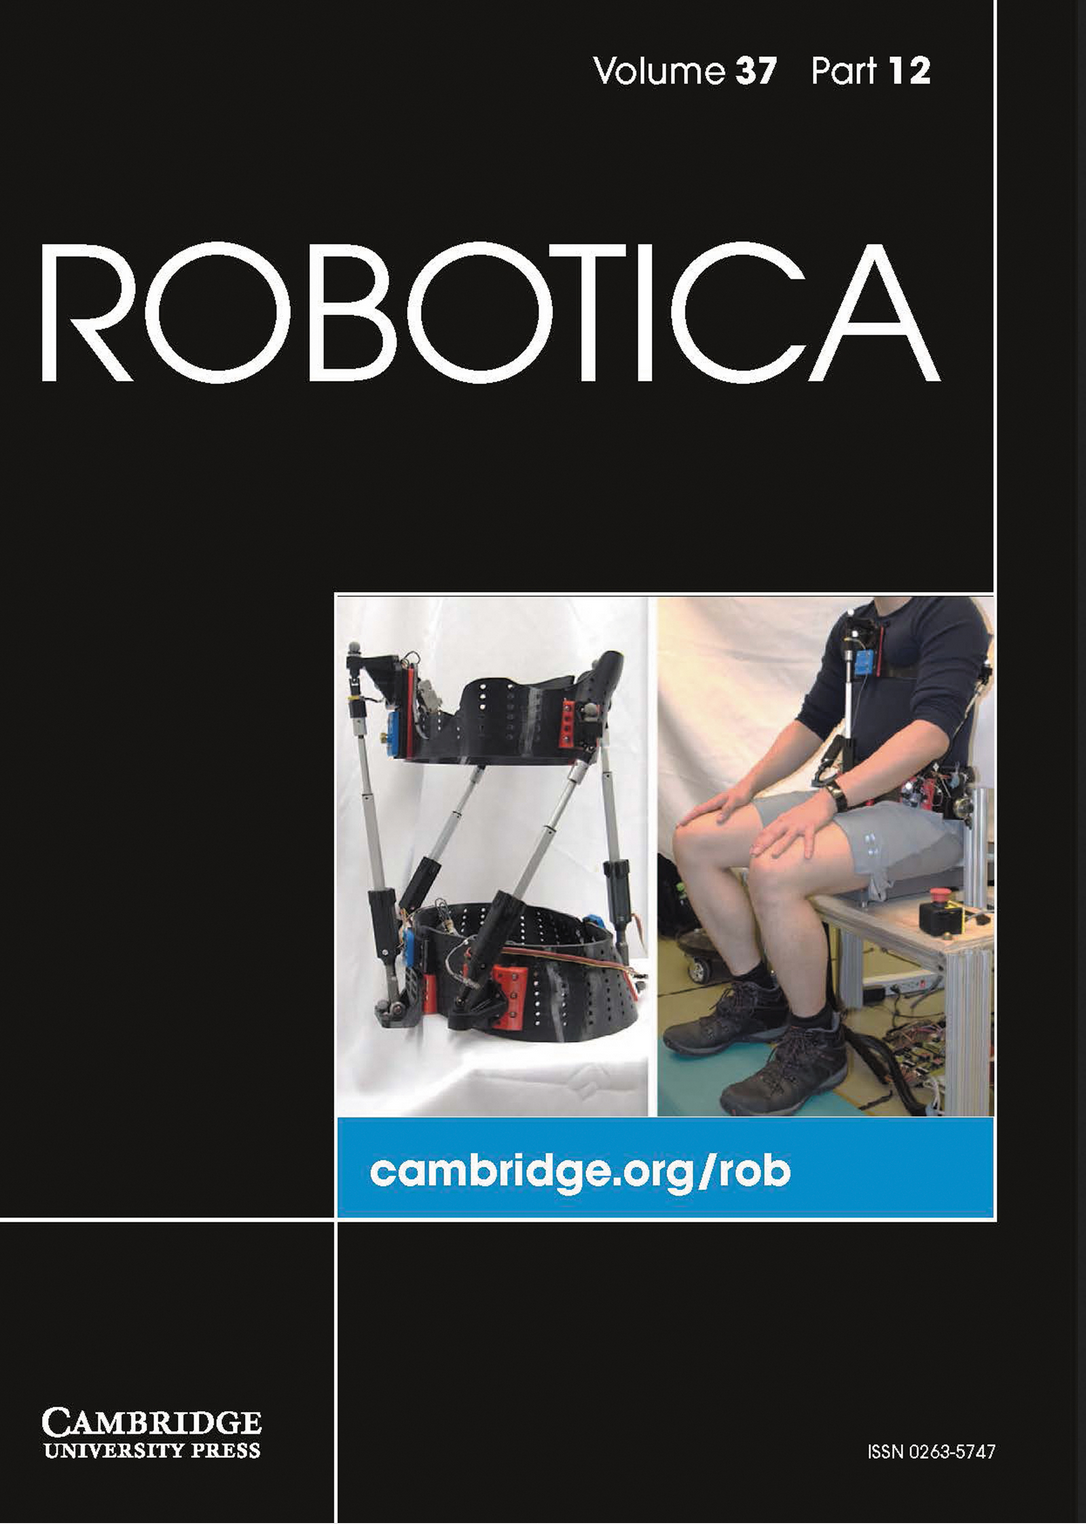 Robotica Volume 37, Special Issue 12 (Wearable Robotics: Dynamics, Control and Applications)